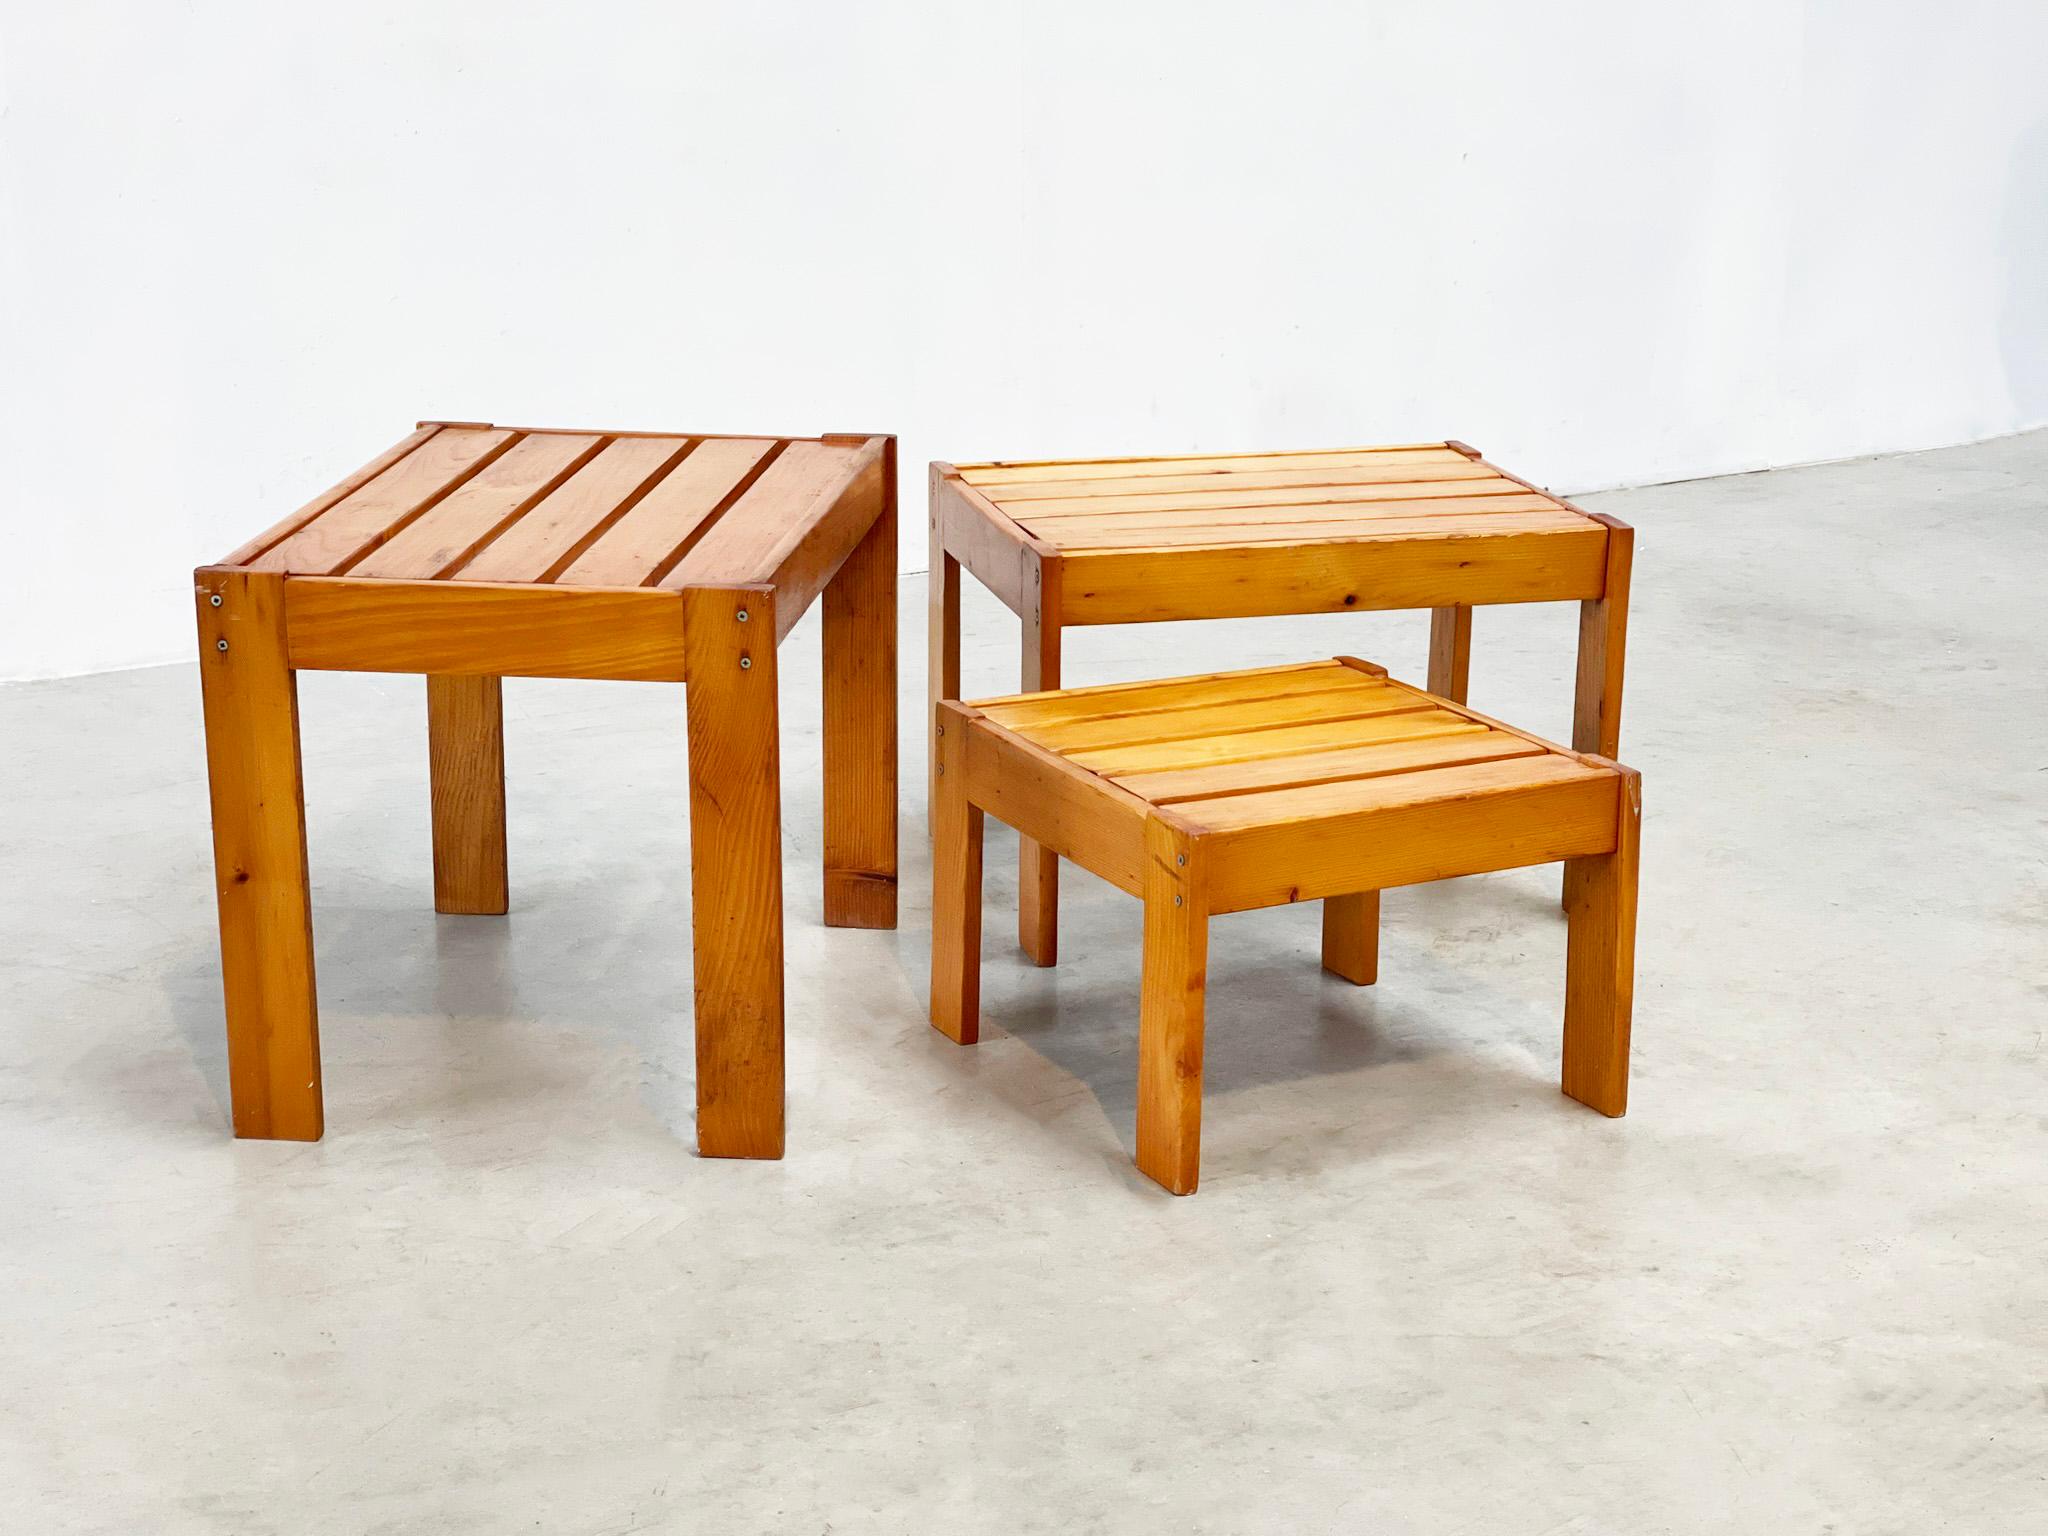 Wooden nesting tables
This kind of furniture is becoming more popular.  This is a set of tables that comes from France. He was probably inspired by several French designers like Pierre Chapo The set was probably handmade in the 1970s by a local